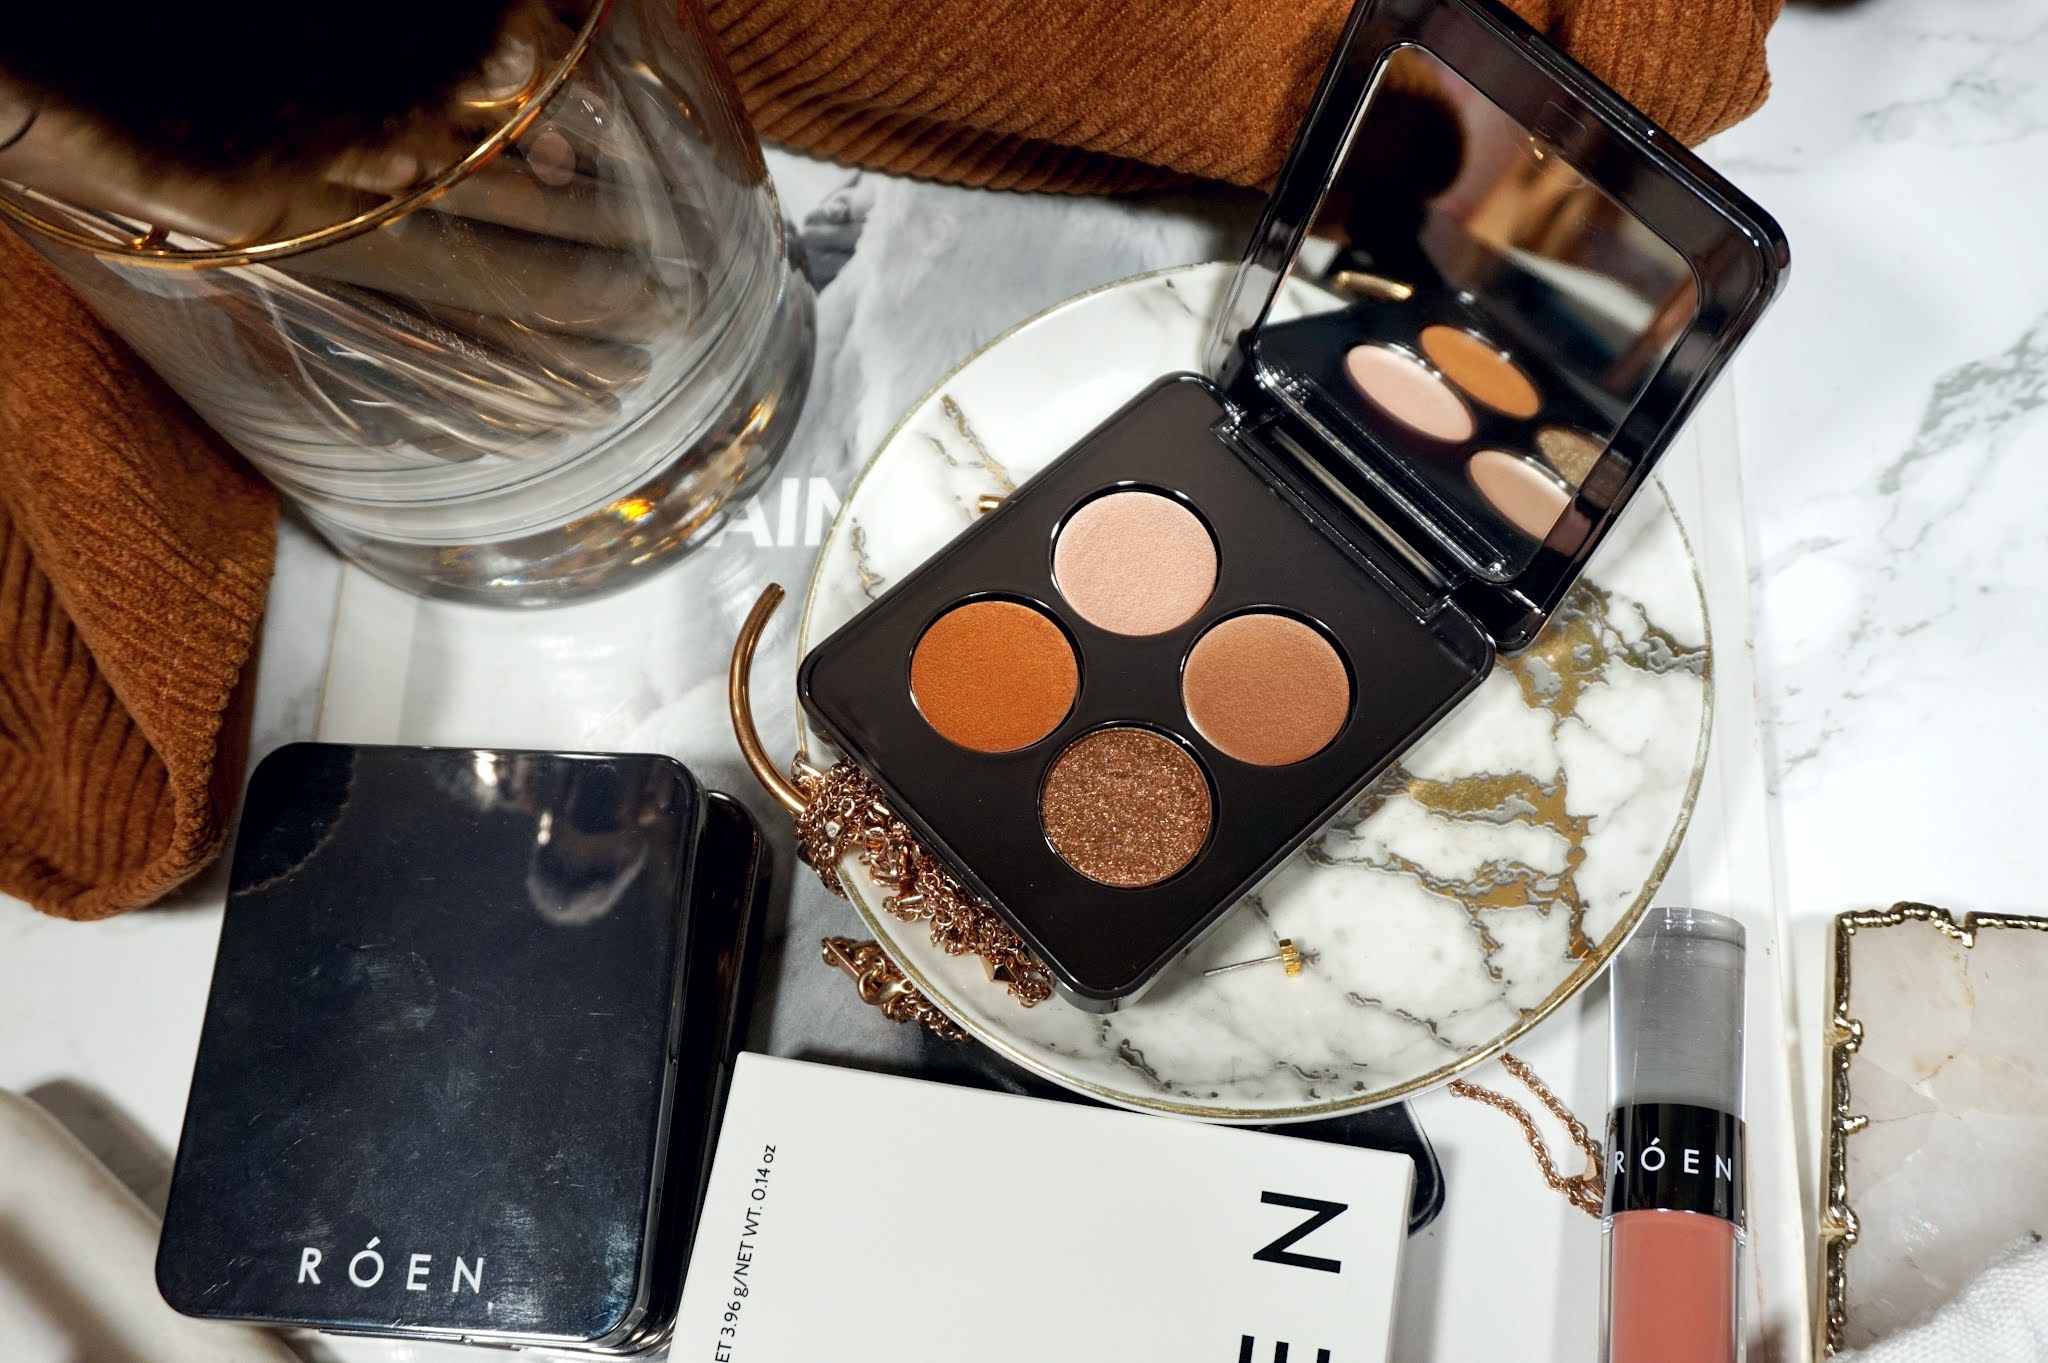 RÓEN Beauty Gold Lust Eye Shadow Palette Review and Swatches